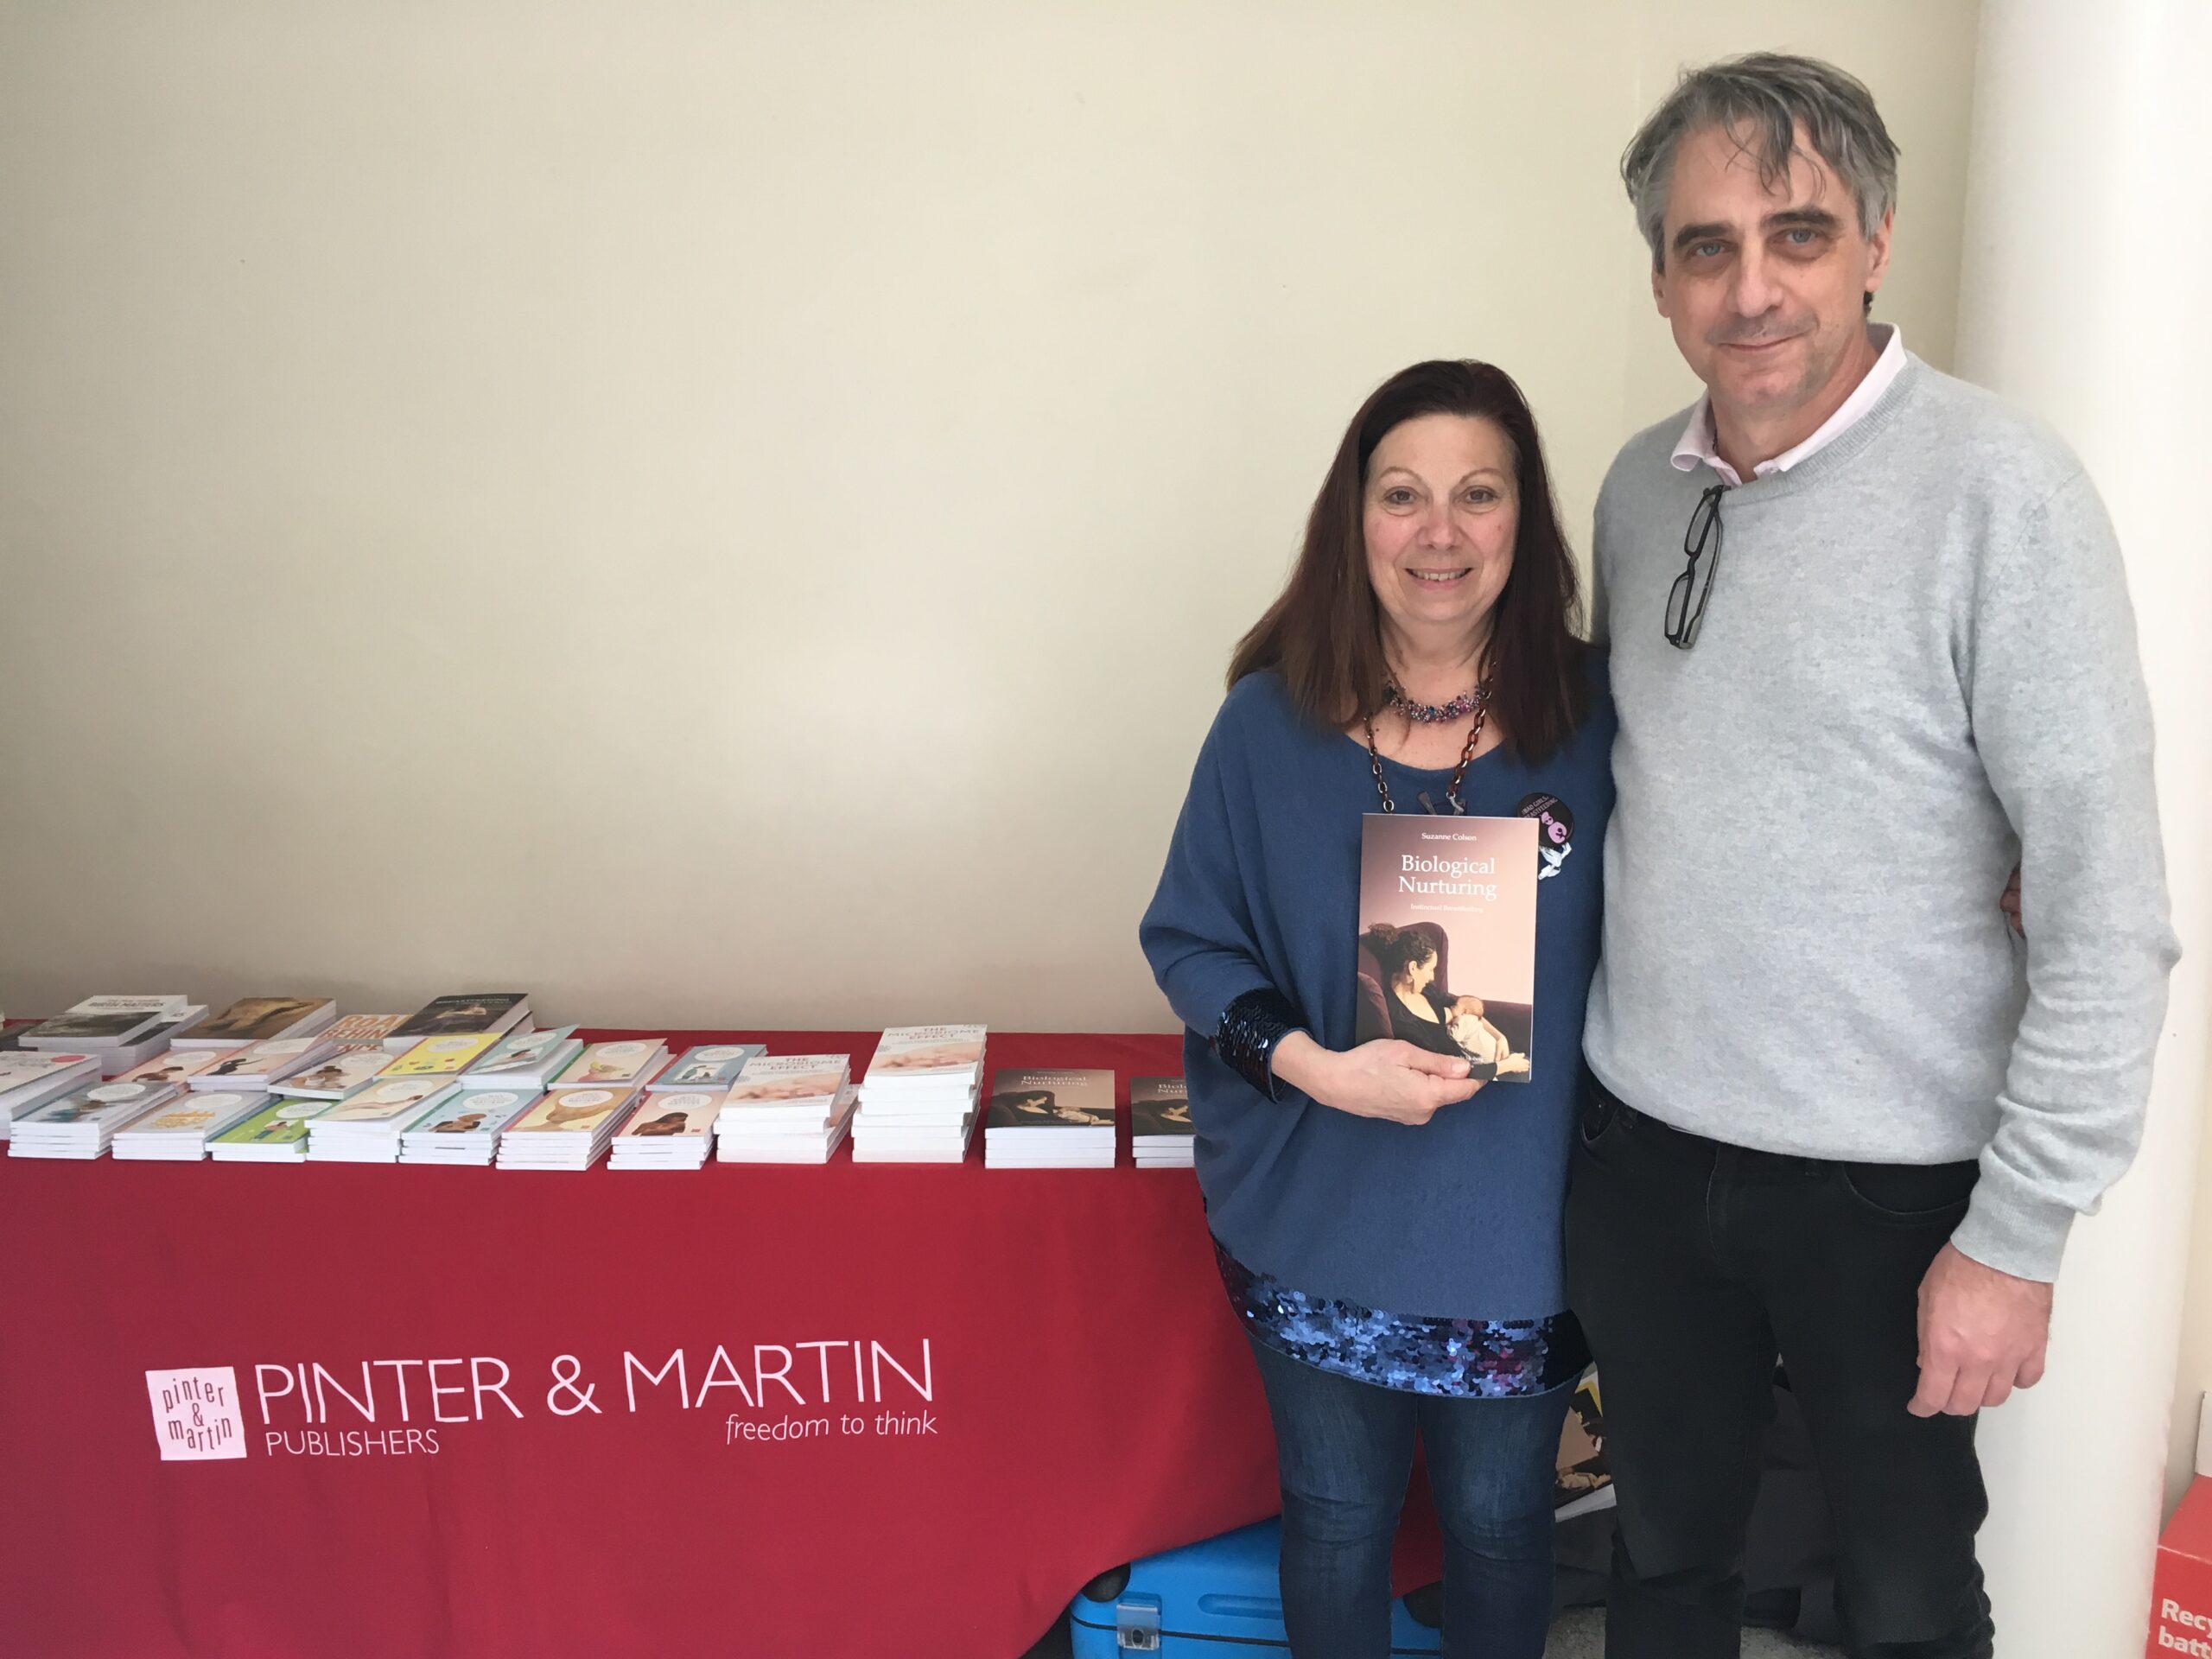 Suzanne Colson with publisher Martin Pinter